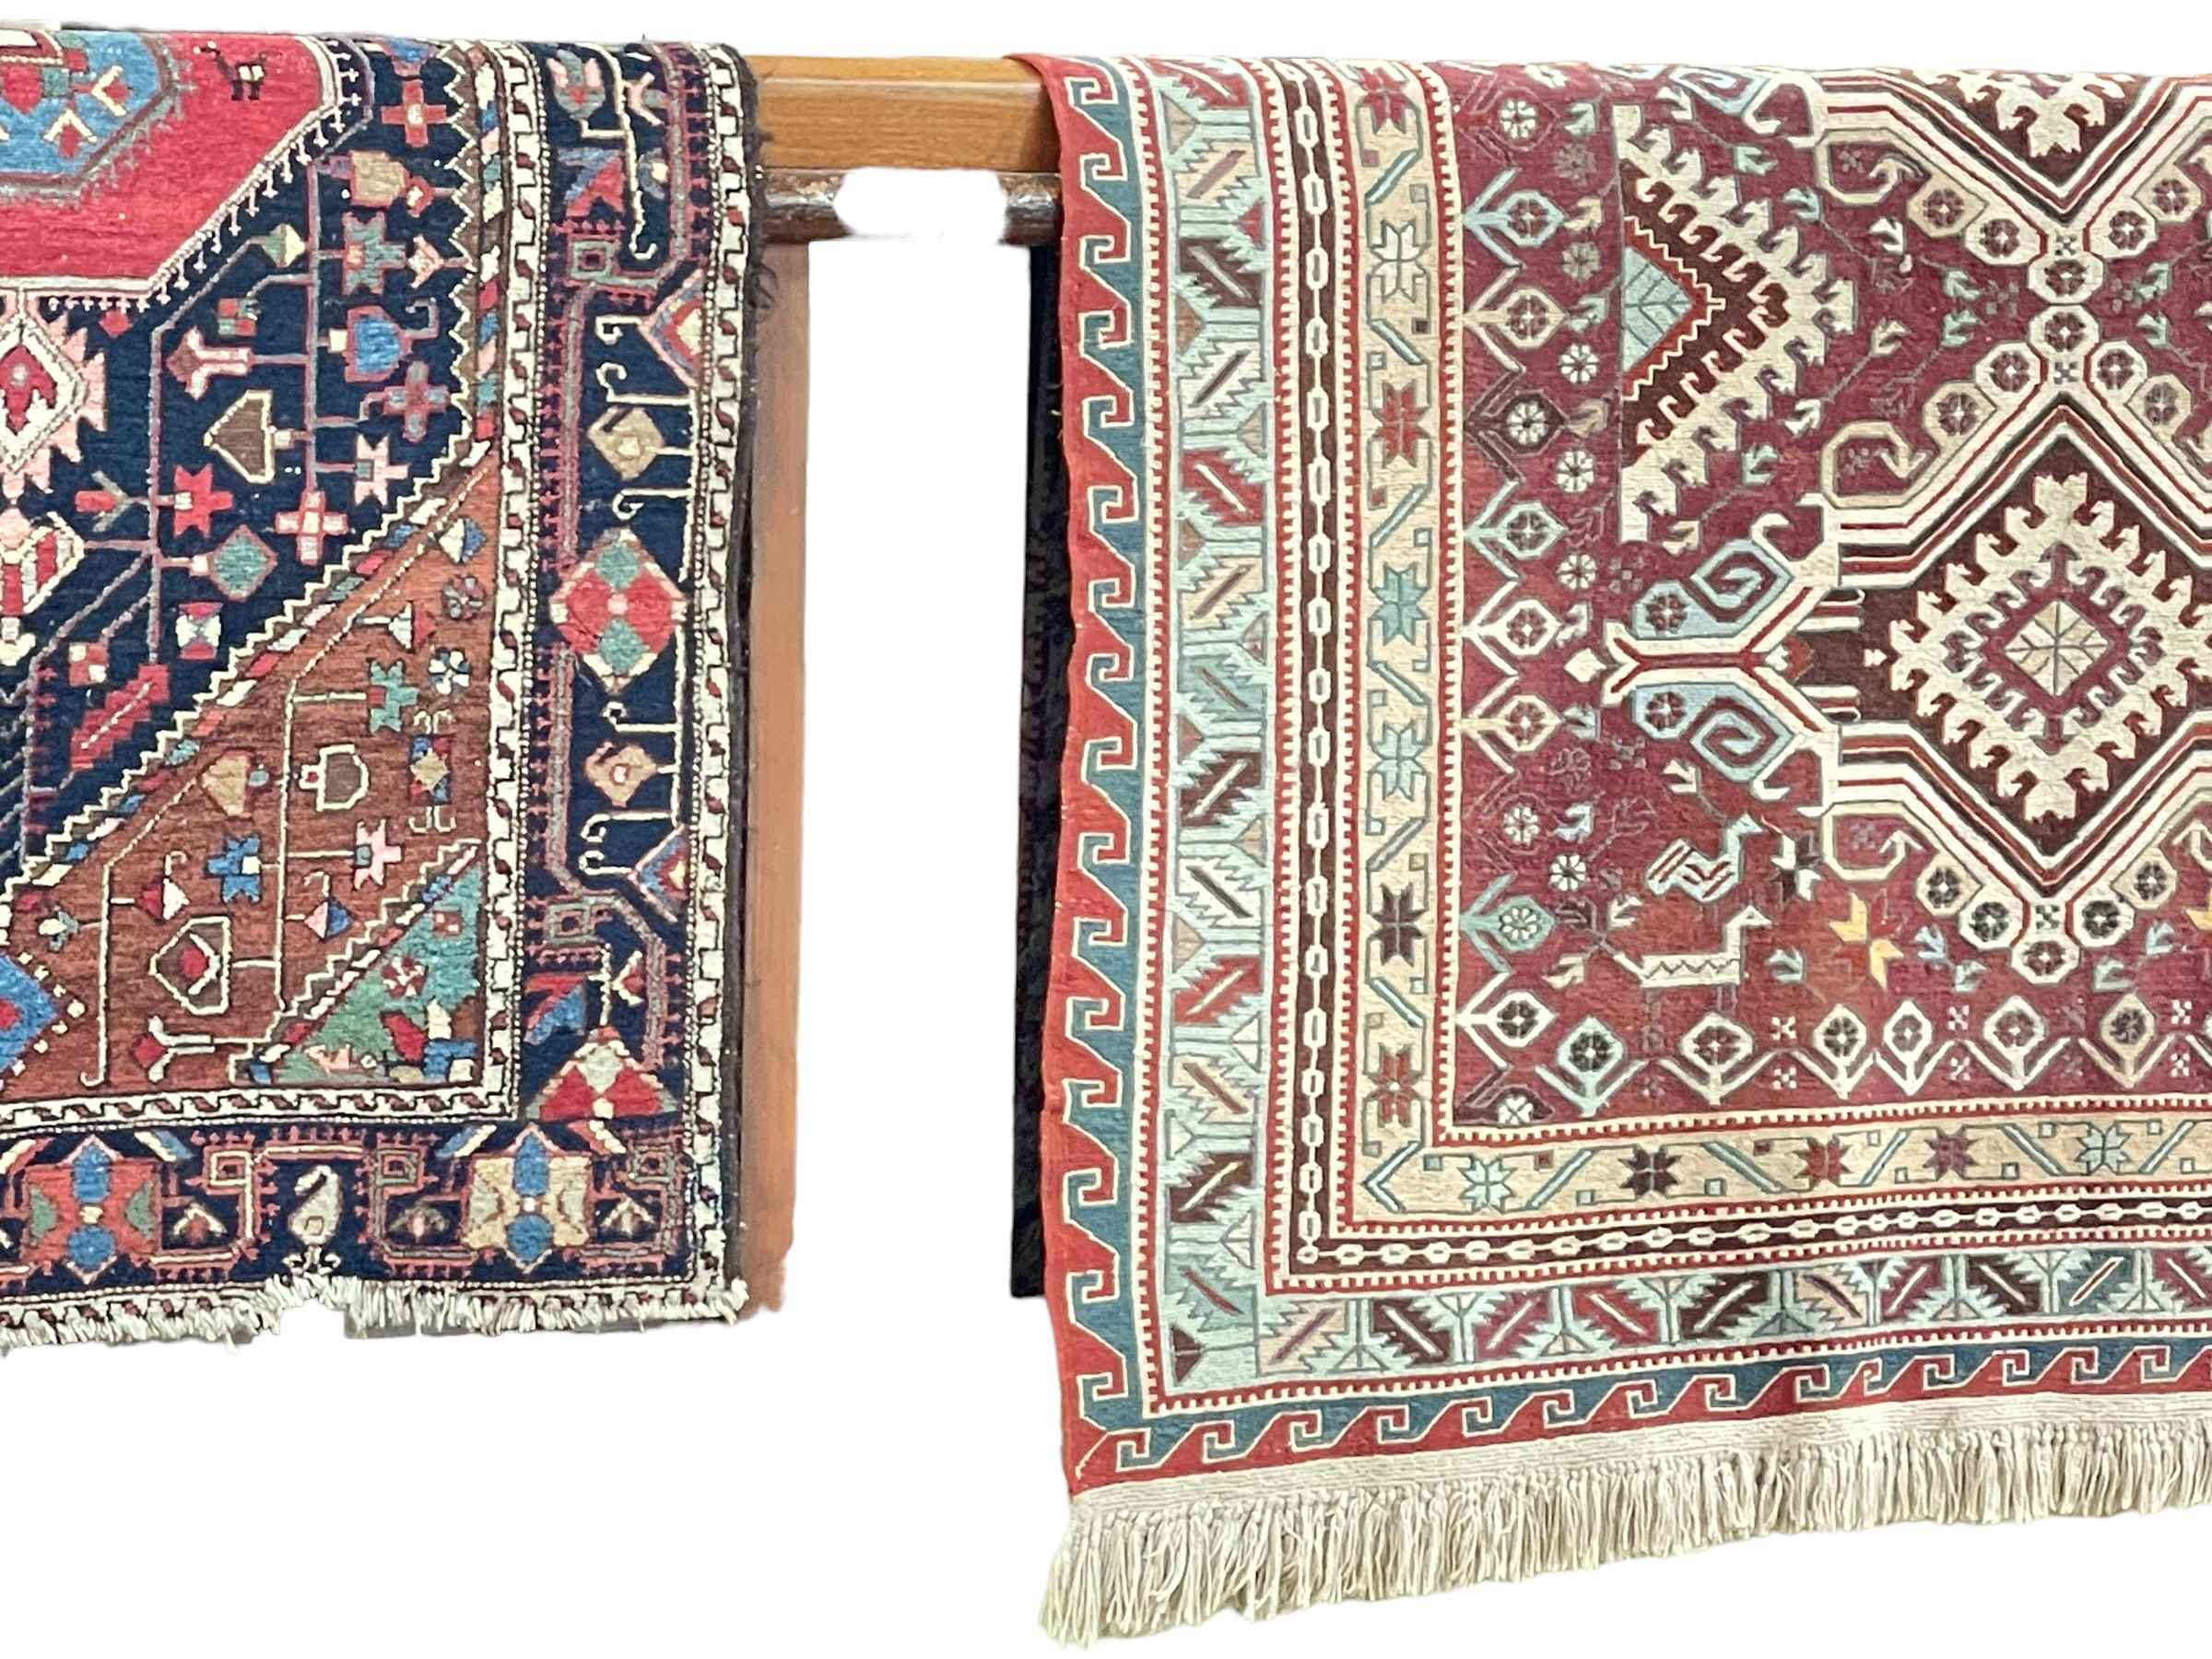 Eastern design wool carpet 2.50 by 1.63 and Persian design rug 1.70 by 1.10 (2). - Image 2 of 2